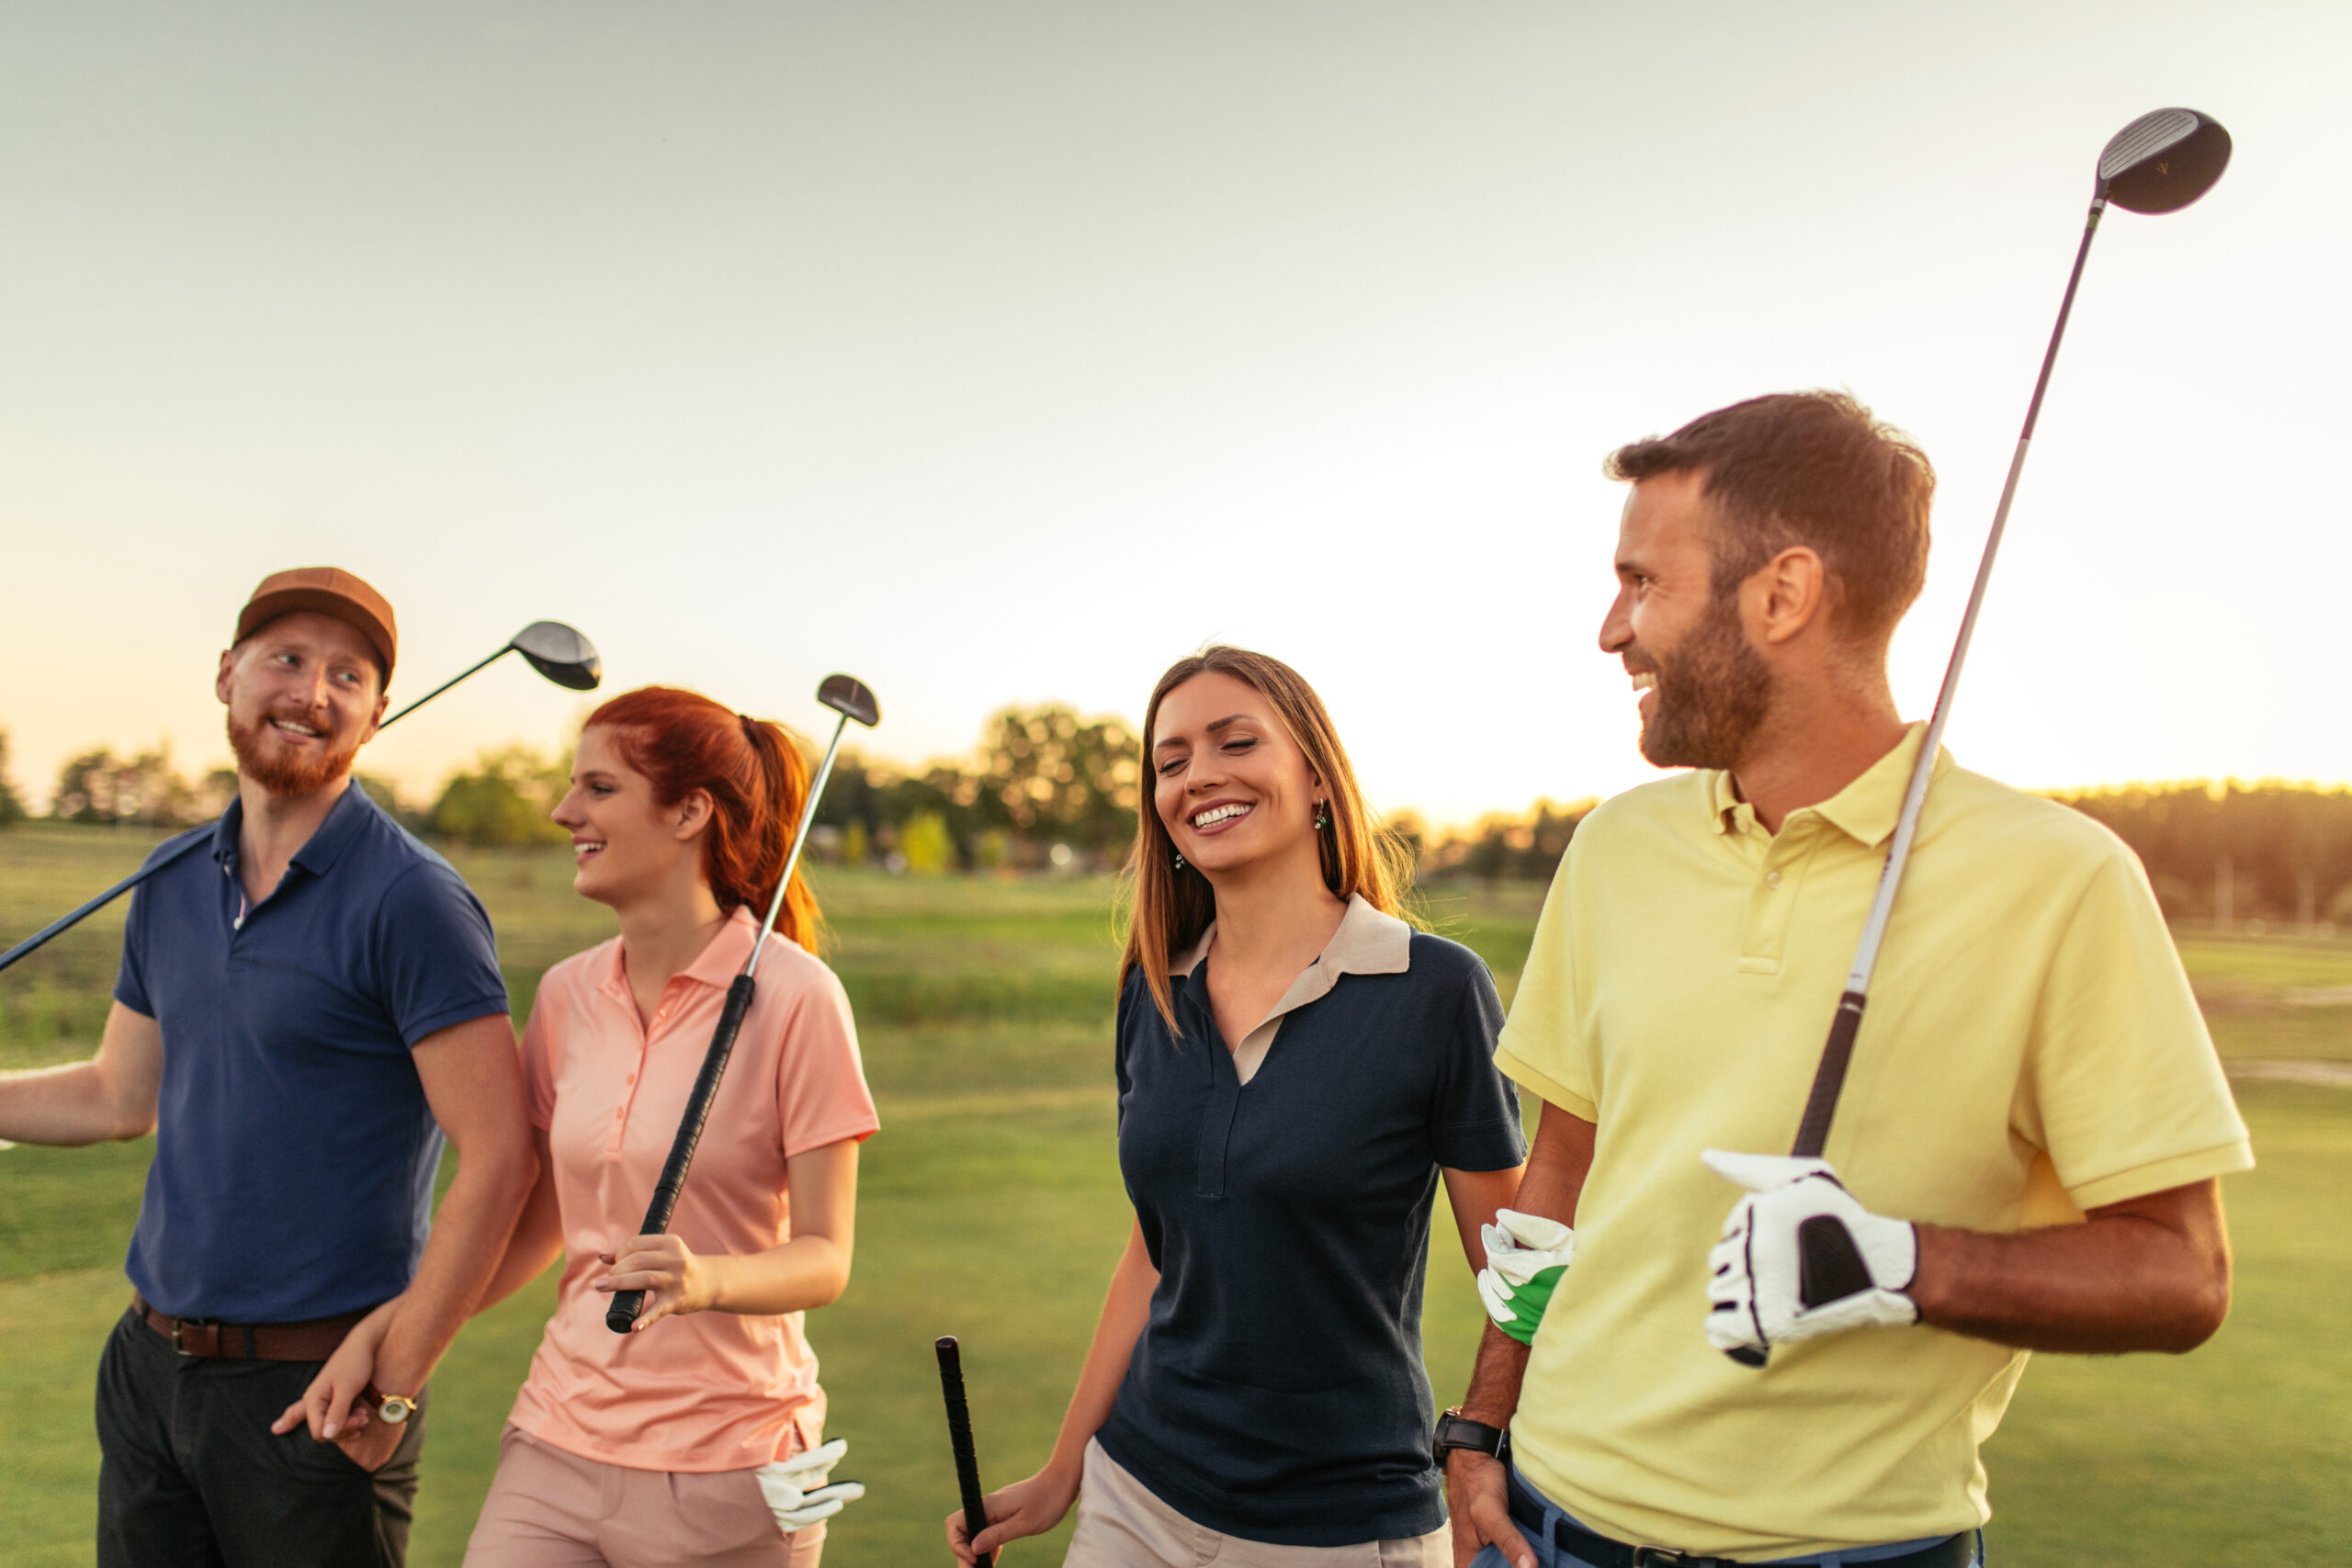 Group of friends walking on the golf course